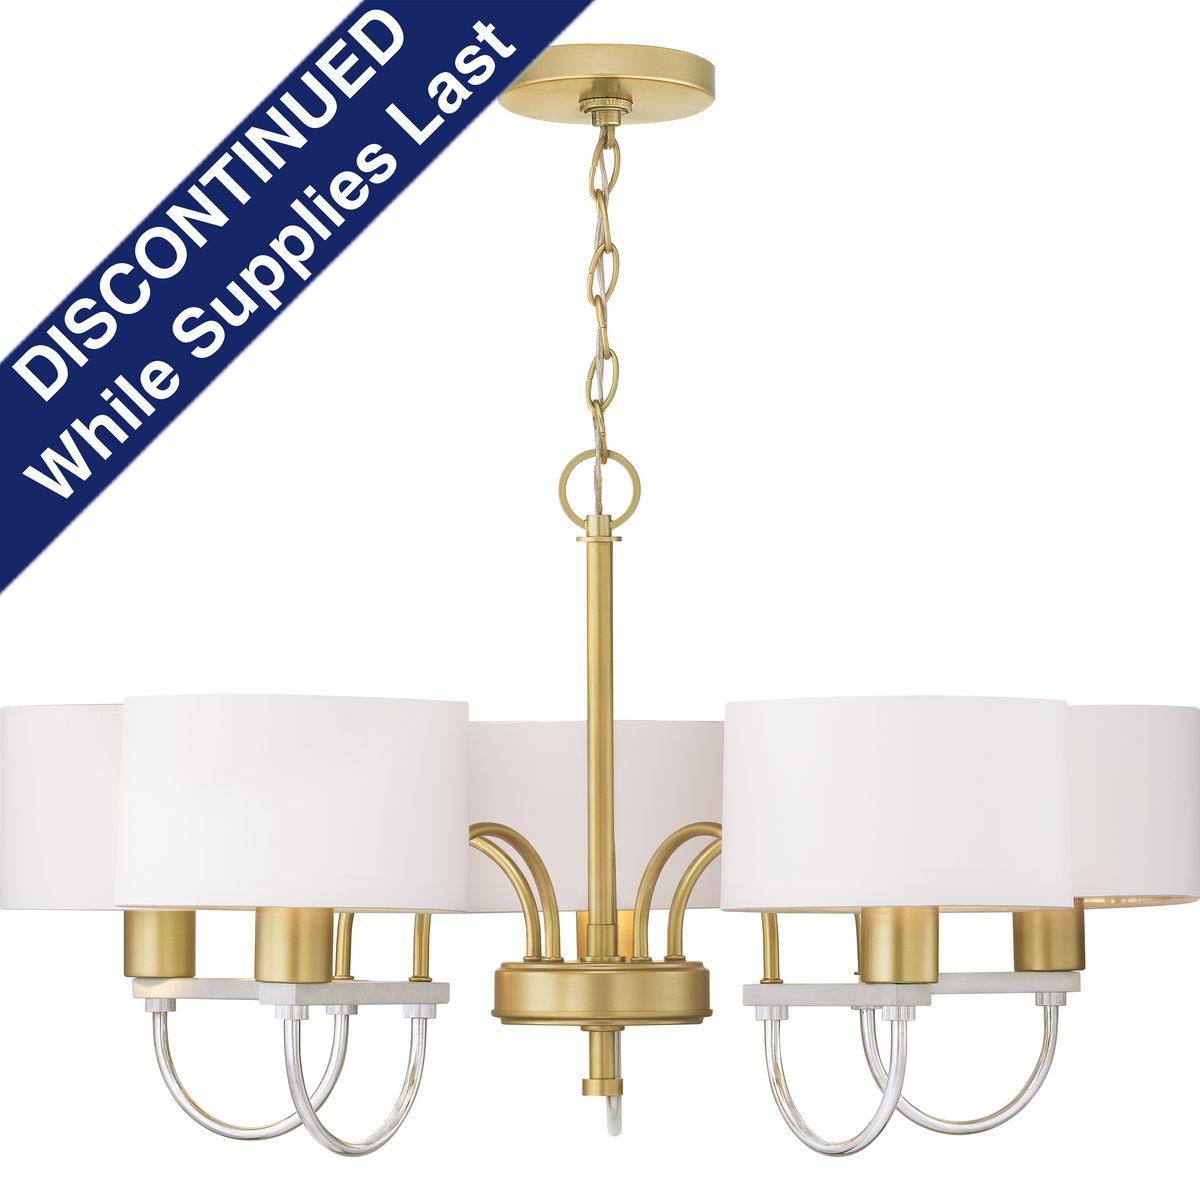 Hubbell P400172-078 The use of mixed media highlights a variety of elegant details are featured in the Rigsby Collection's five-light chandelier. A hint of faux marble appears in the horizontal cross bars, while Vintage Gold and Chrome accents create a dual toned finish. Dec